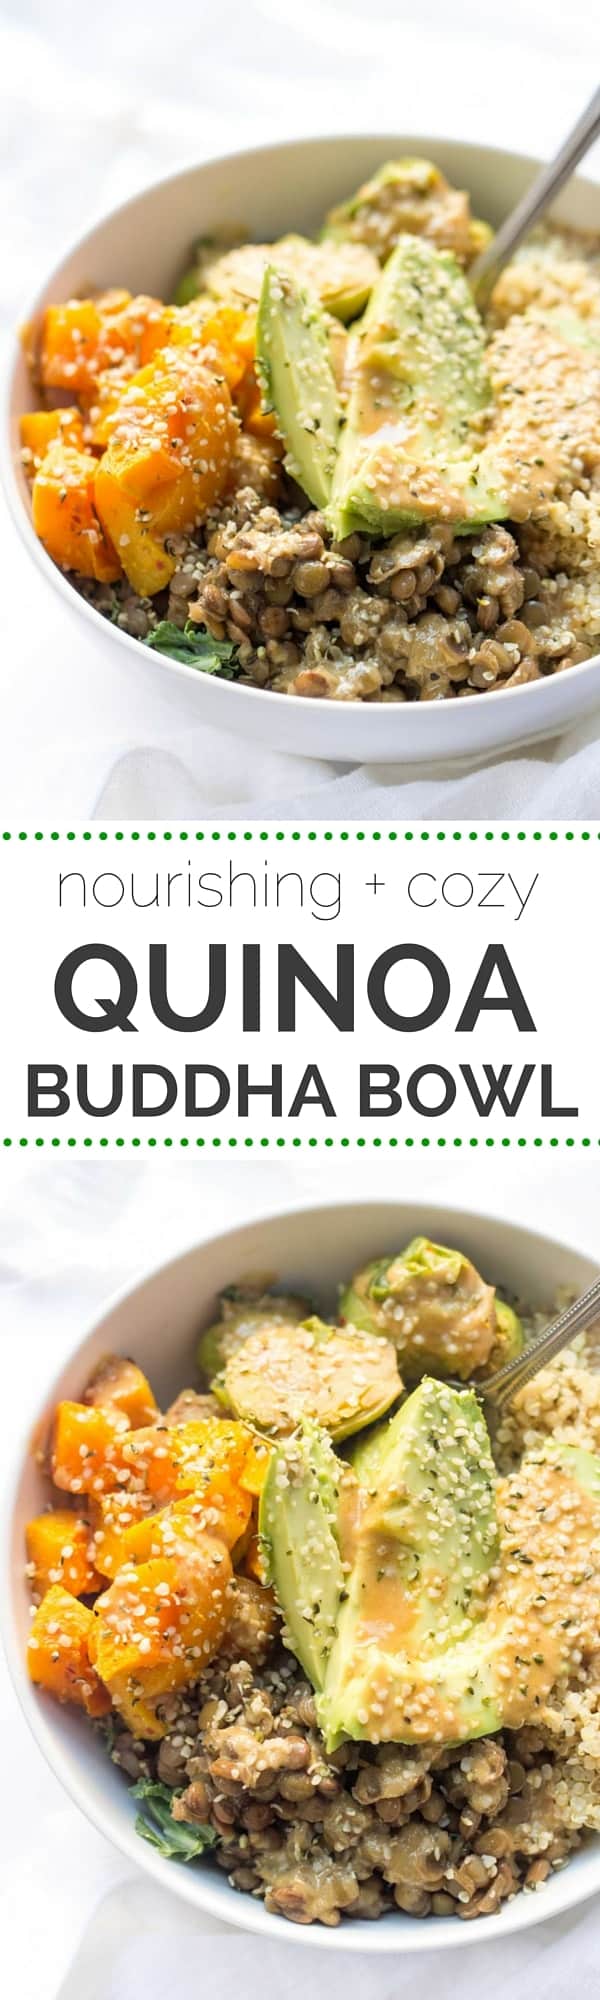 This cozy Quinoa Buddha Bowl makes the most EPIC dinner or lunch -- just follow these 5 simple steps and you can have a custom bowl of plant-based food every time